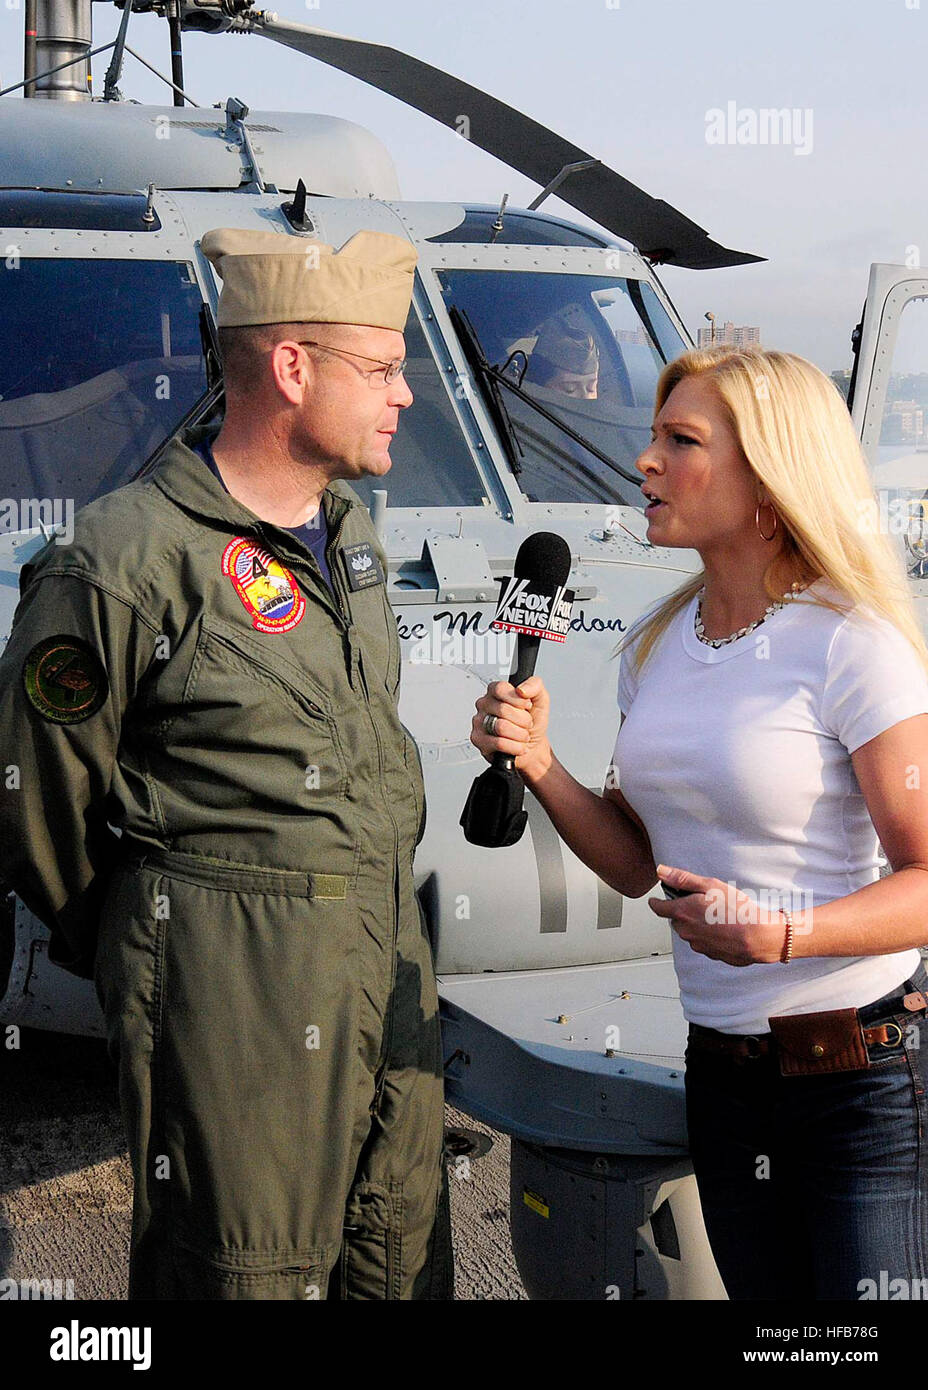 120526-N-YY933-071 NEW YORK (may 26, 2012) -- Senior Chief Operations Specialist (SW/AW) Andy Sutter from Assault Craft Unit 4 talks with Fox and Friends News Reporter Anna Kooiman in a live interview on the flight deck of the amphibious assault ship USS Wasp (LHD 1) during Fleet Week New York.This marks the 25th year the city has celebrated the nation's sea services for the citizens of New York and the tri-state area. This year, the seven-day event, coincides with the commemoration of the Bicentennial of the War of 1812, with more than 6,000 service members from the Navy, Marine Corps and Coa Stock Photo